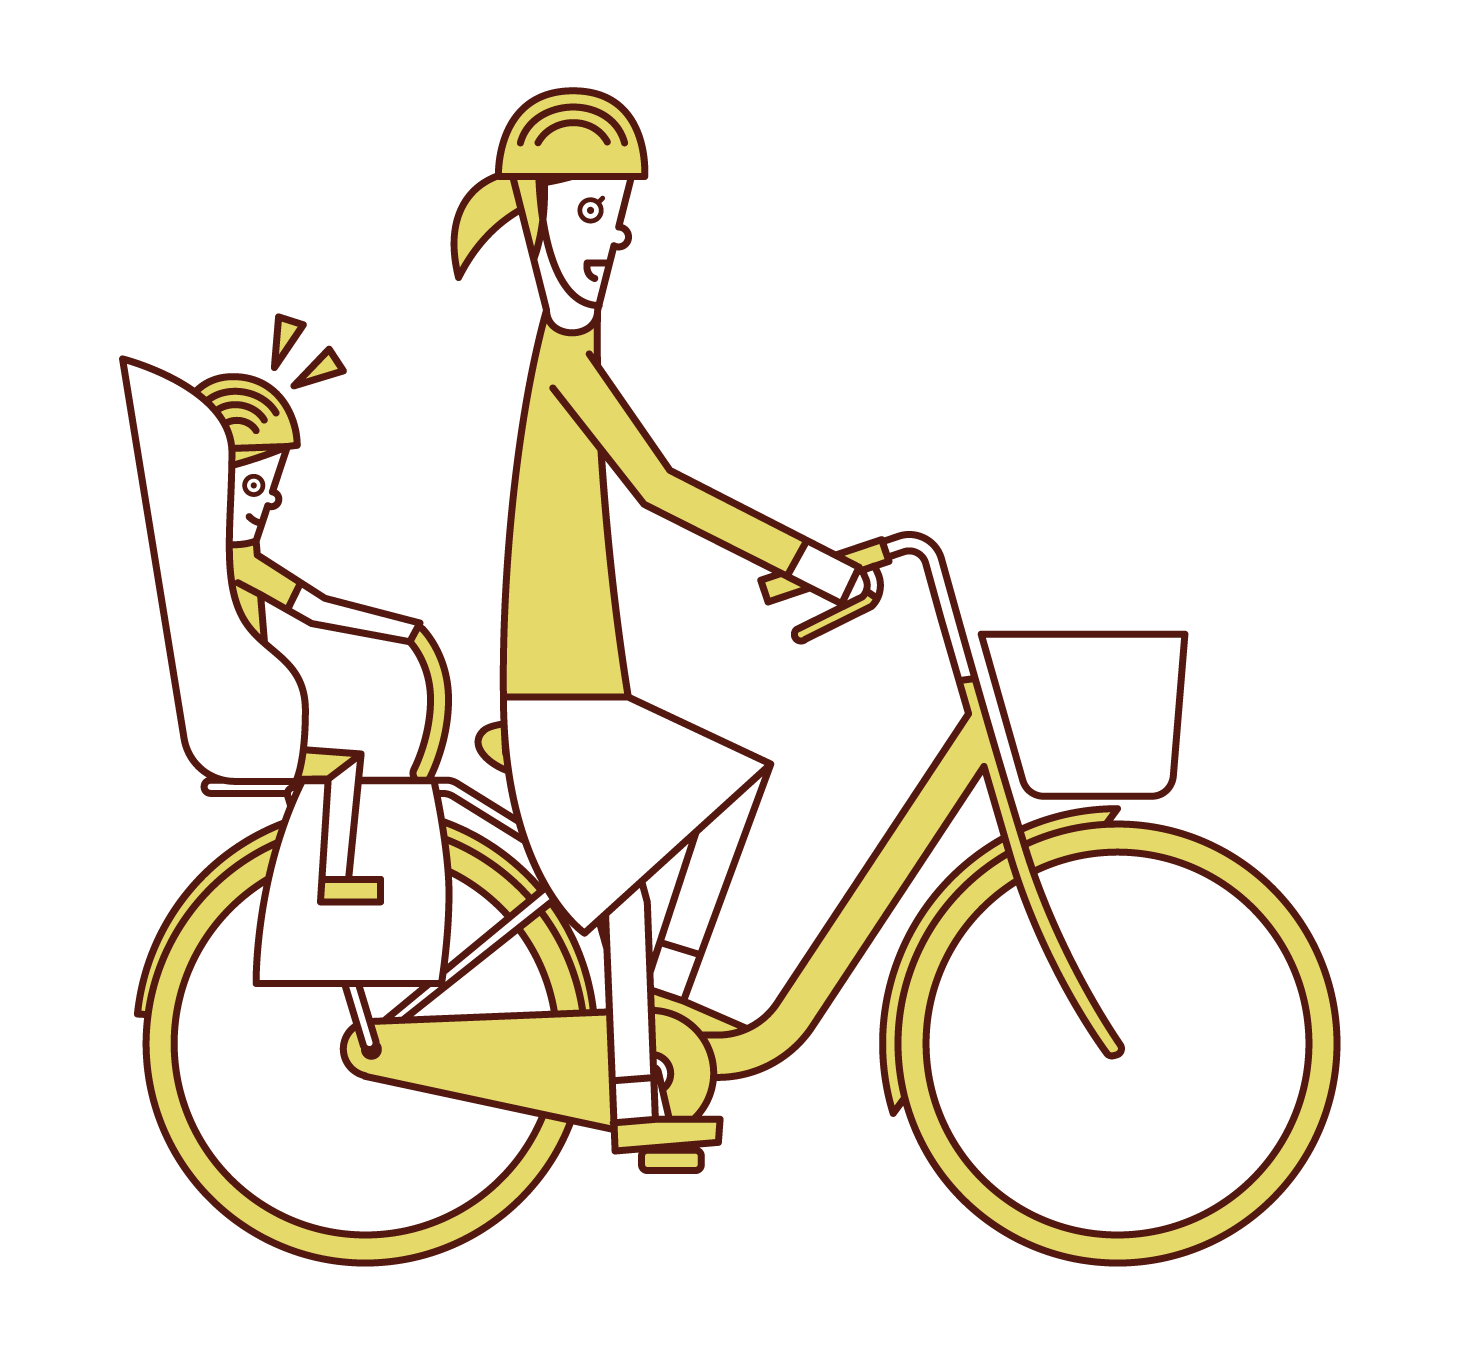 Illustration of a woman riding a bicycle with a child in a child seat